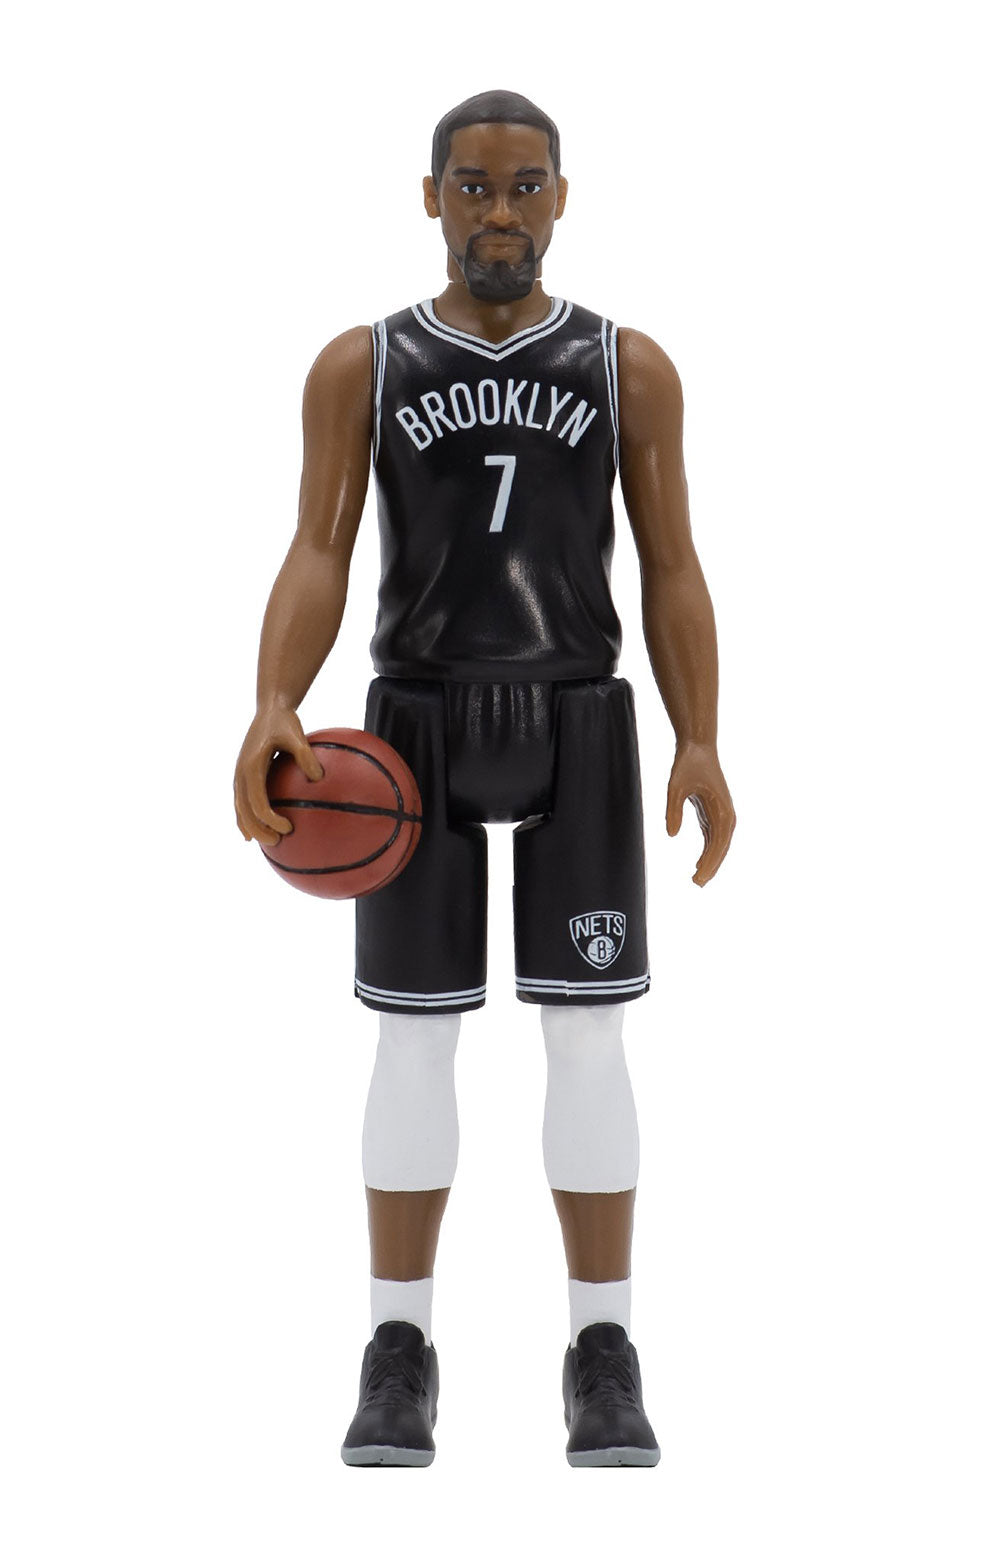 NBA Supersports Figure - Kevin Durant (Nets)